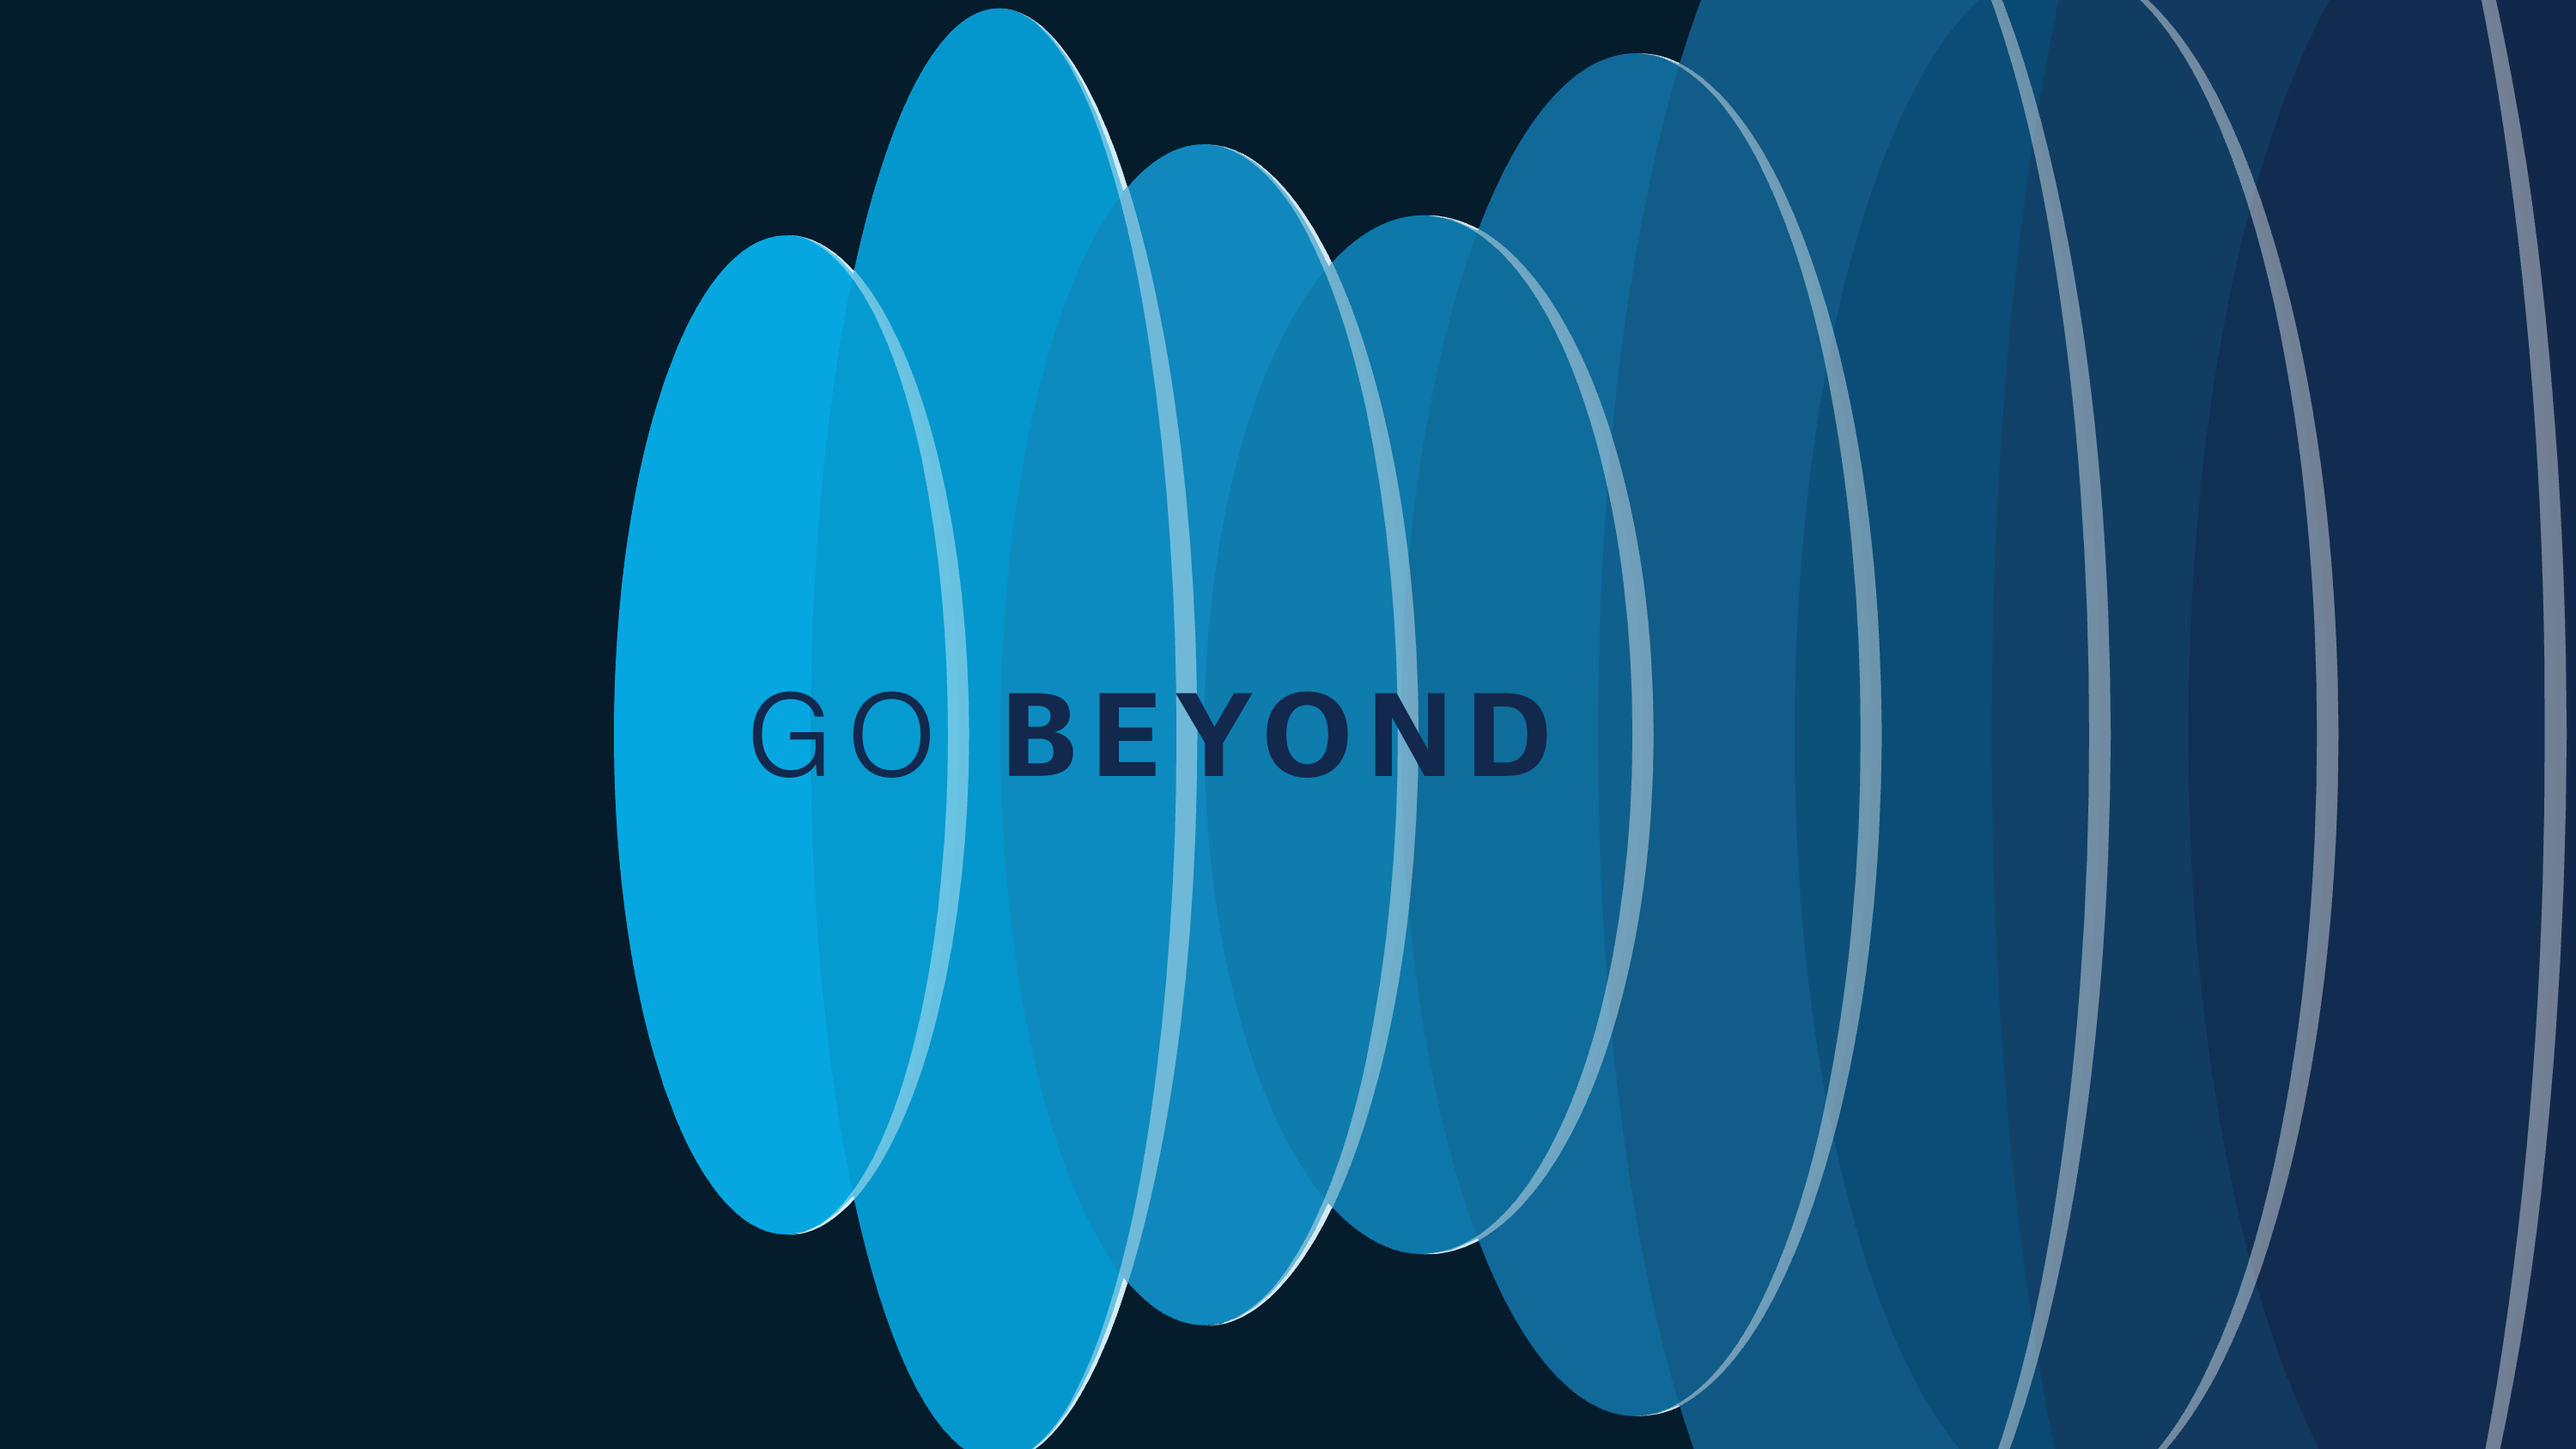 Get Inspired and Go Beyond with Cisco Customer Experience at Cisco Live